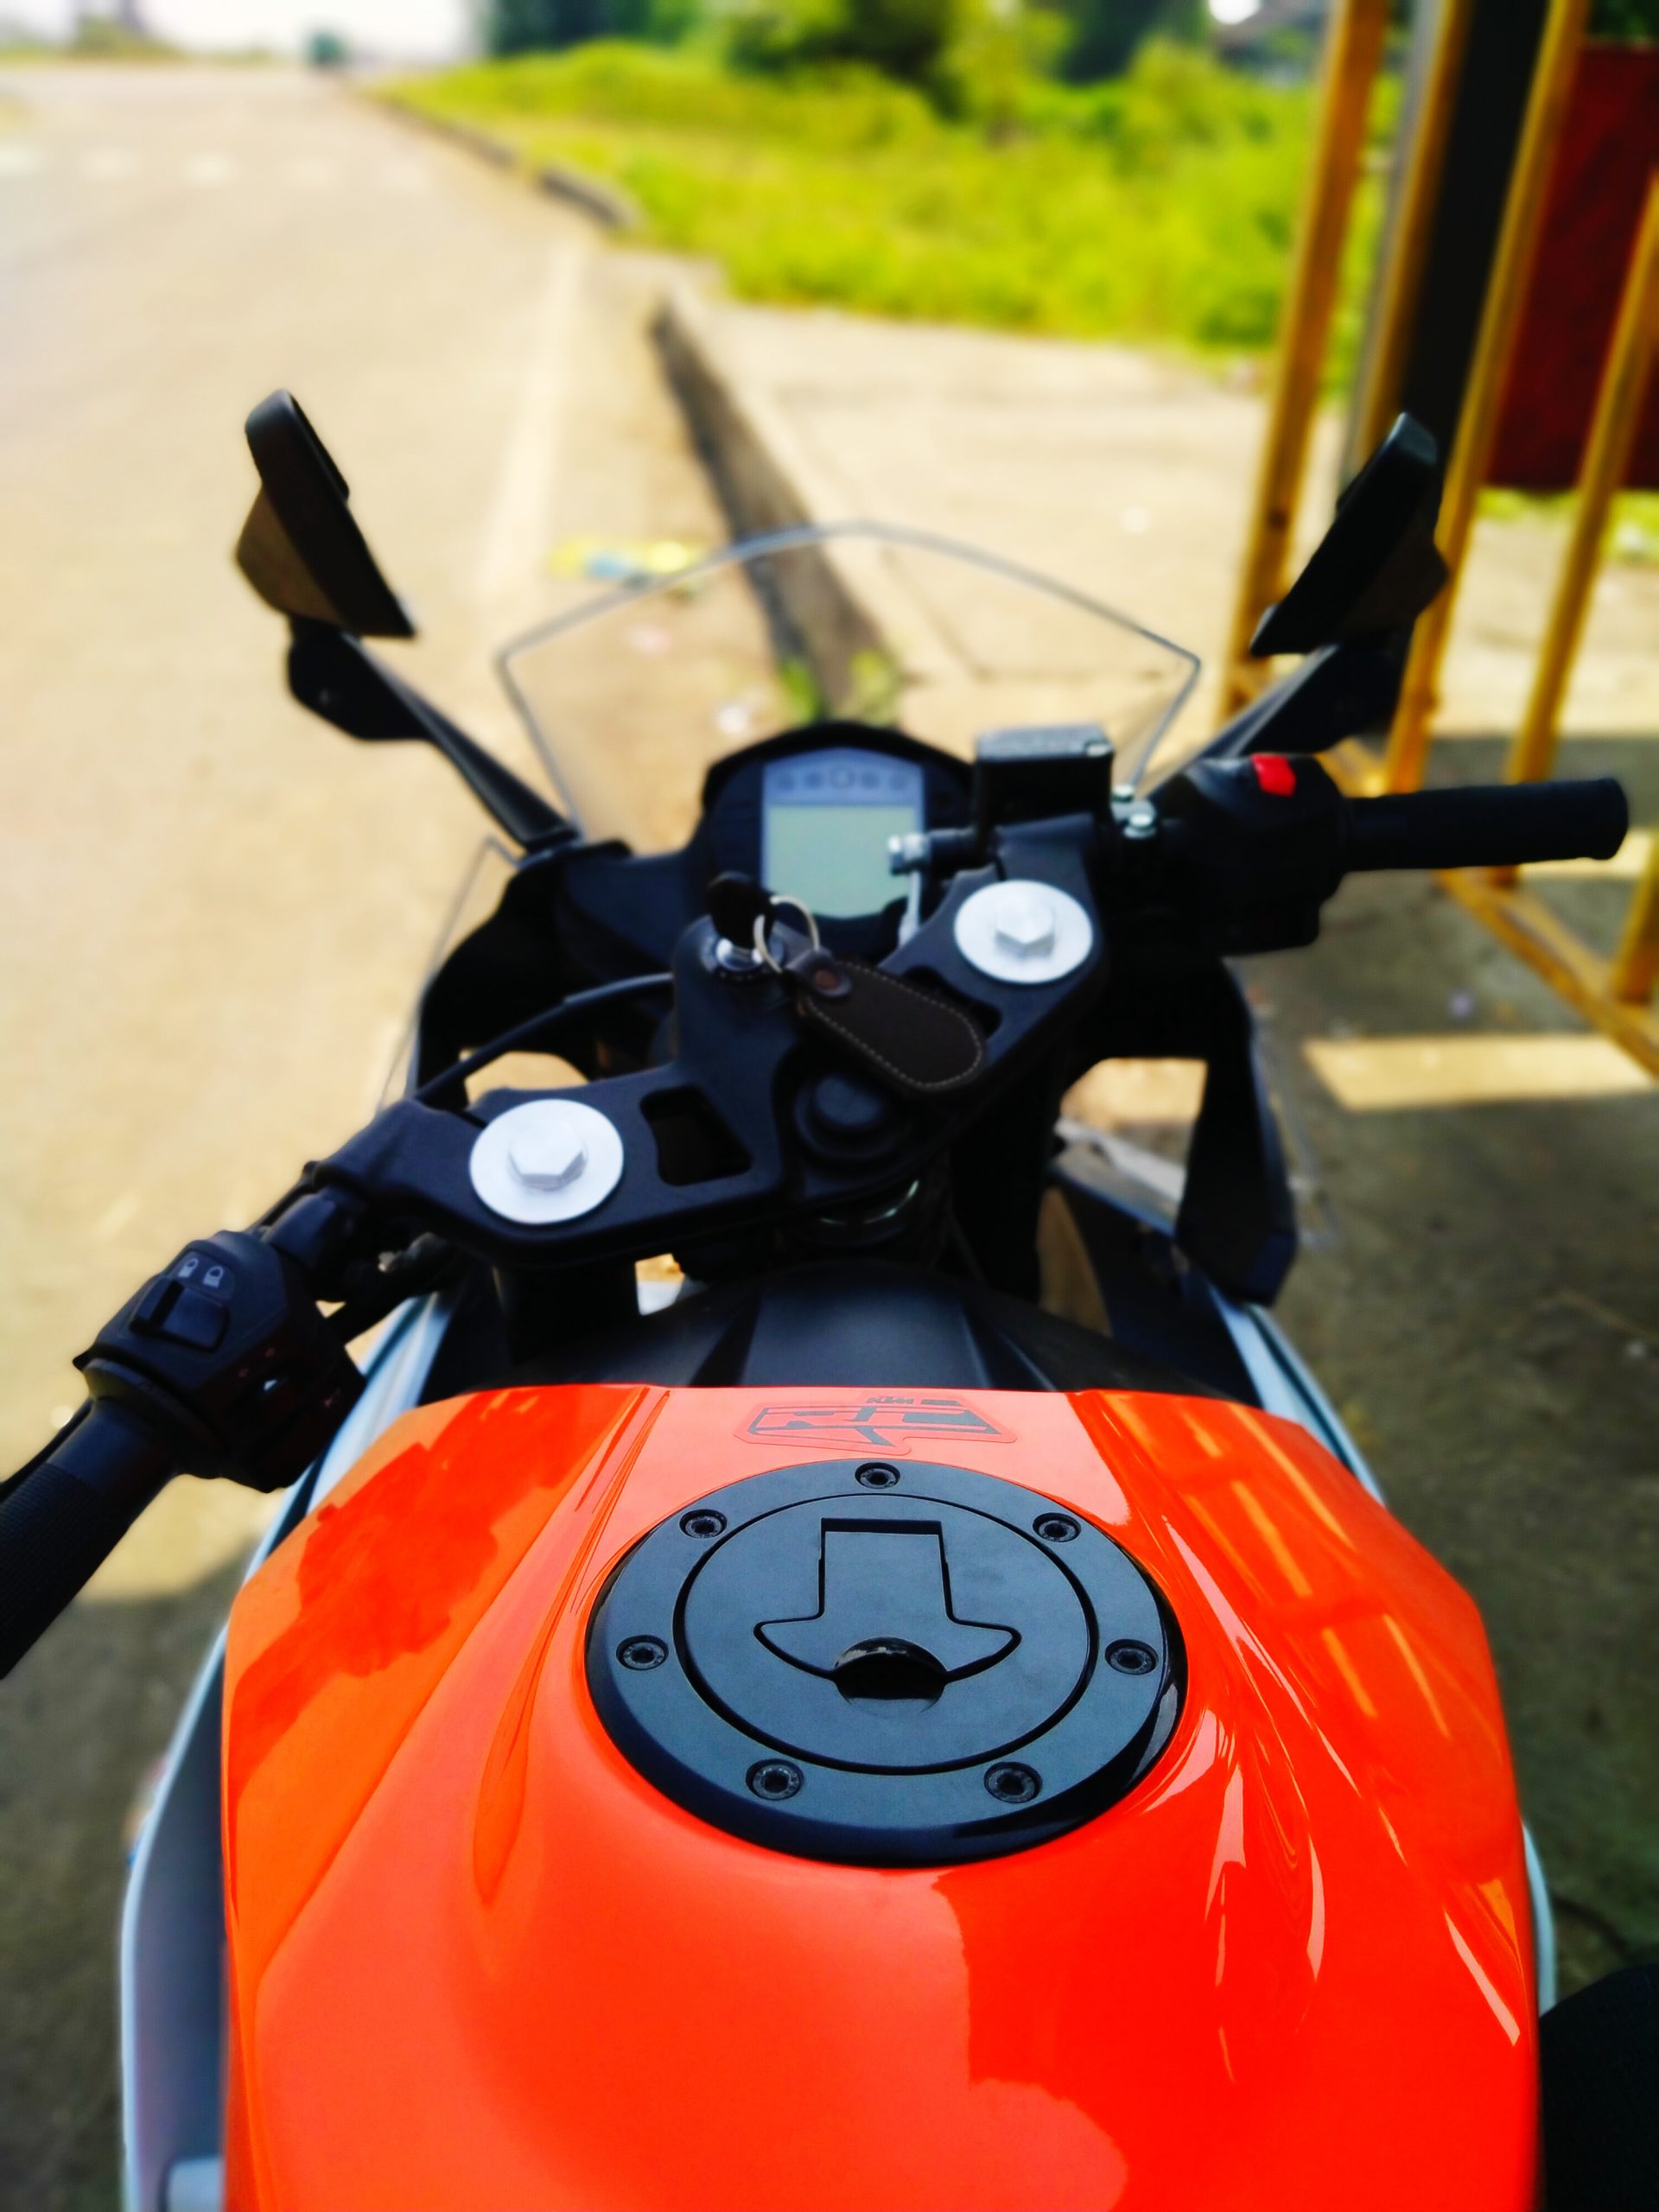 Fuel tank and handle of a bike